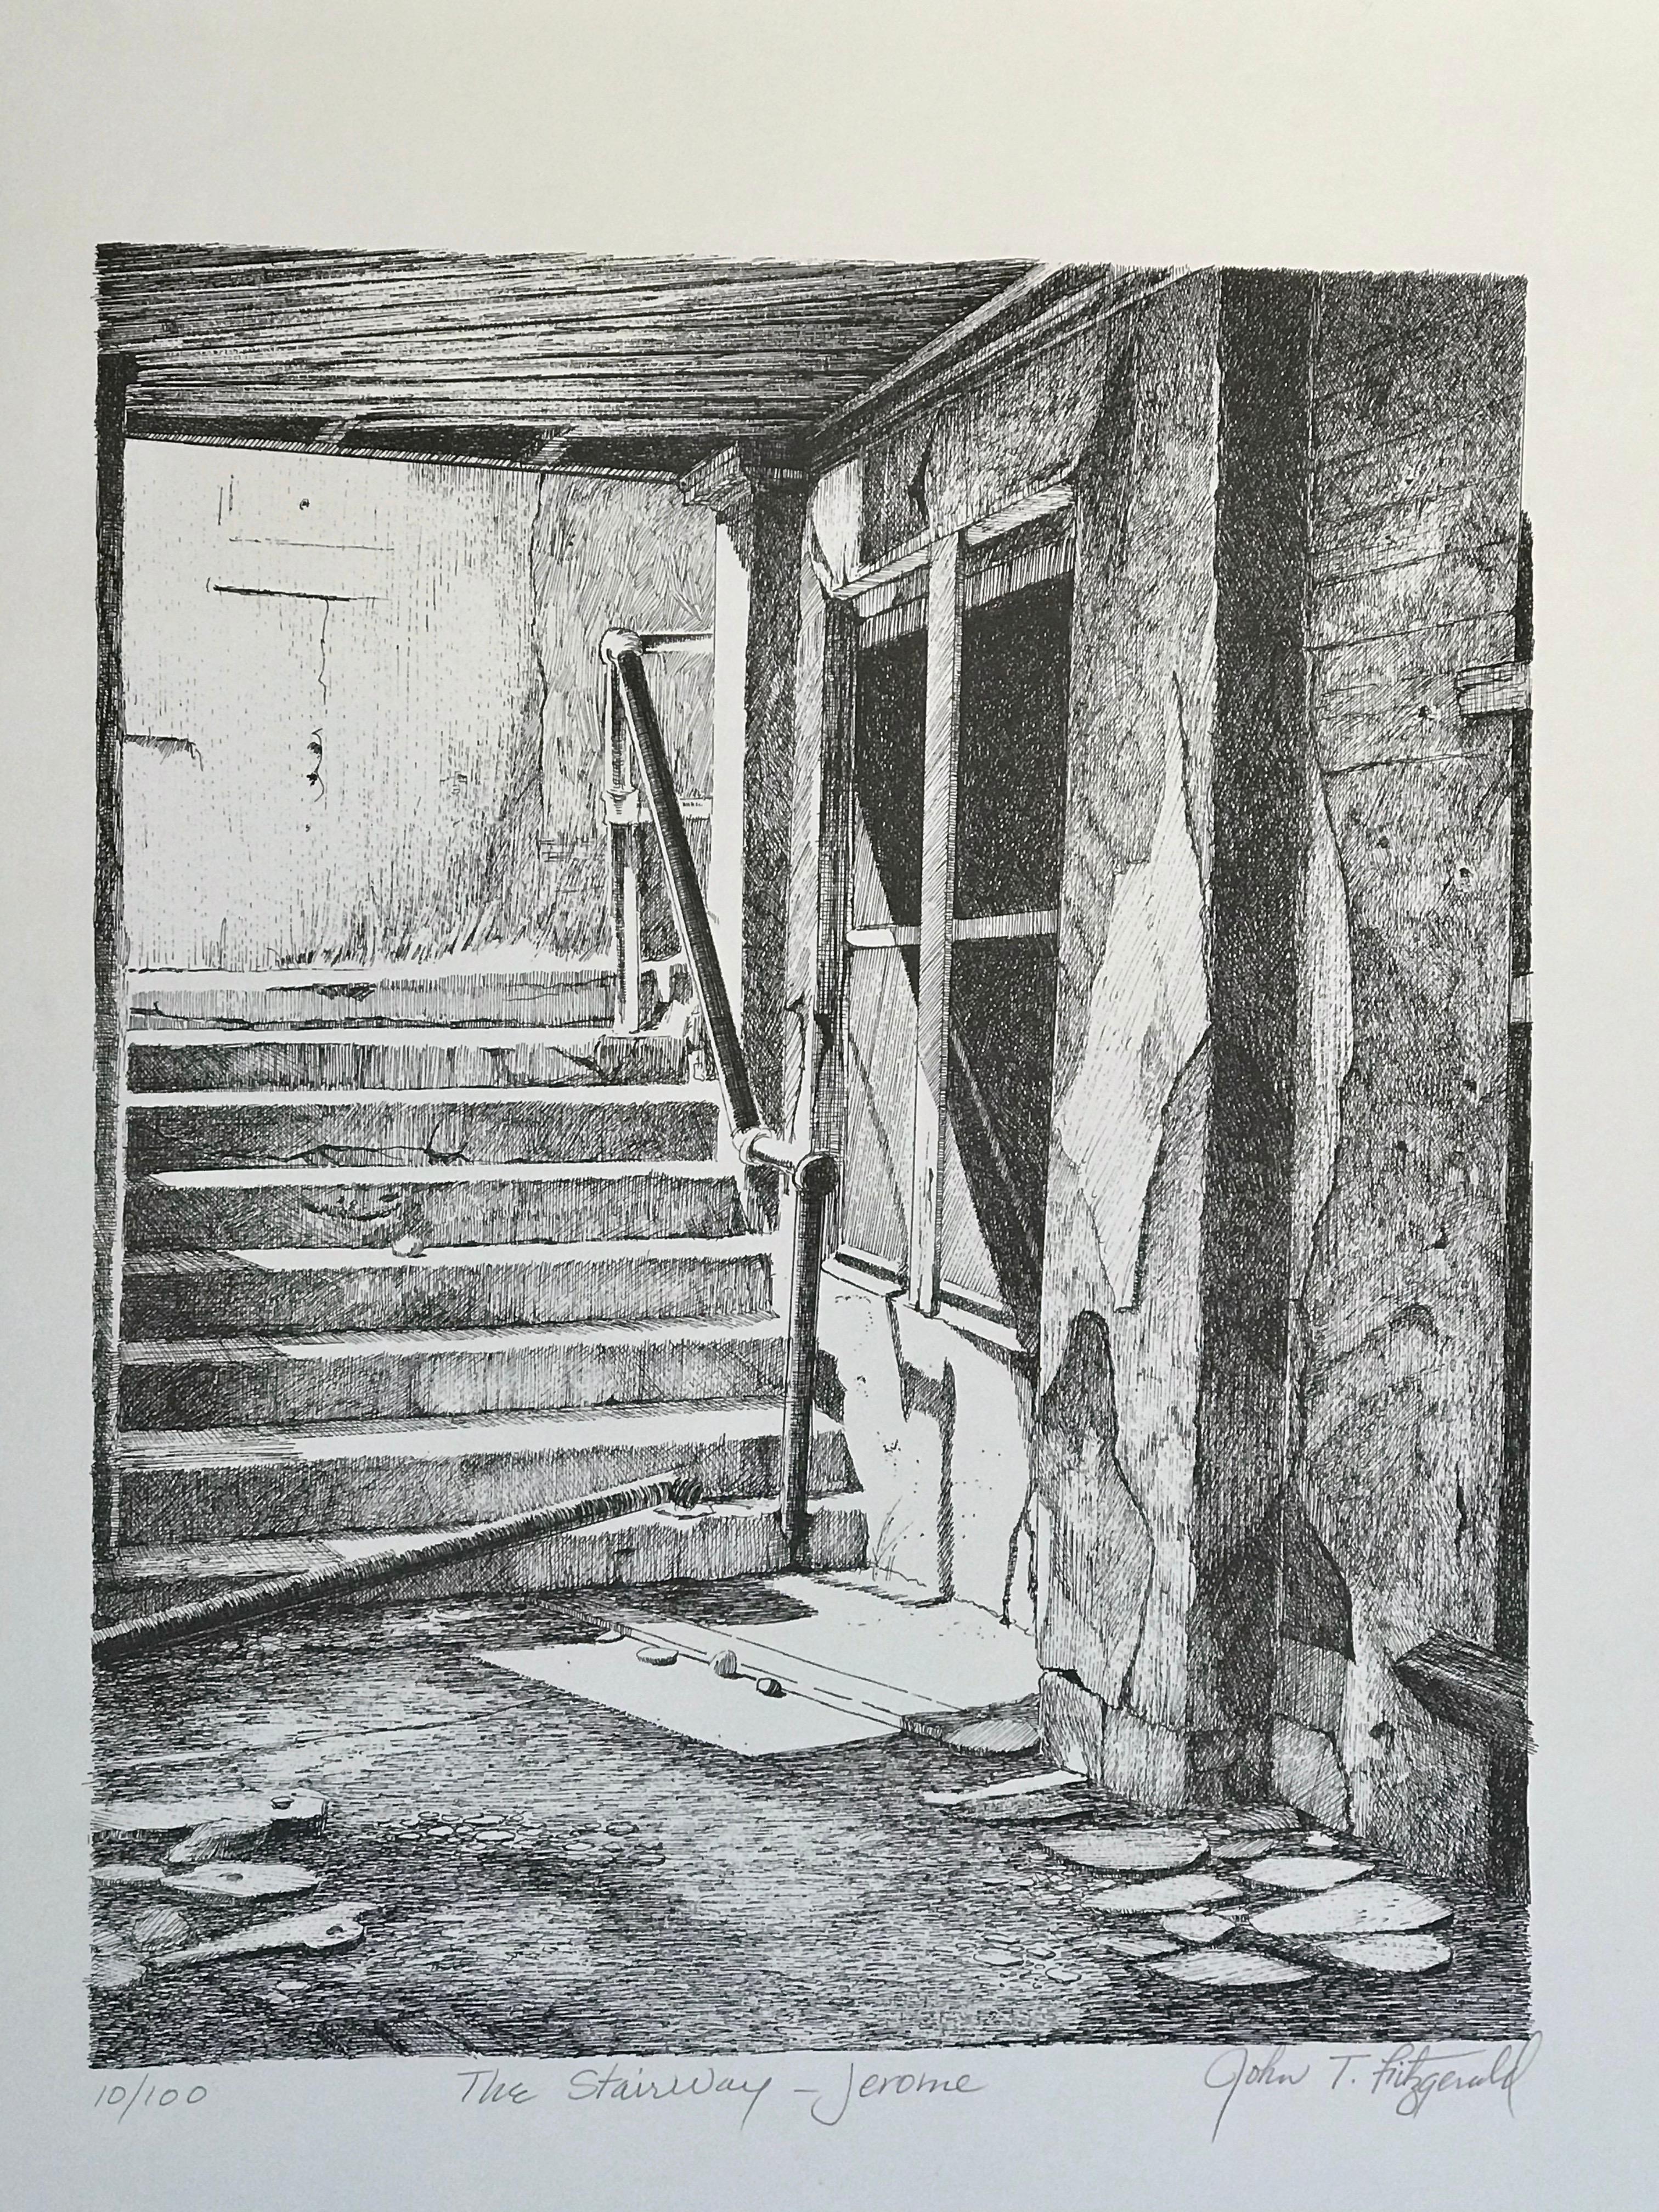 The Stairway Jerome by John T Fitzgerald, black, white print, Arizona ghost town